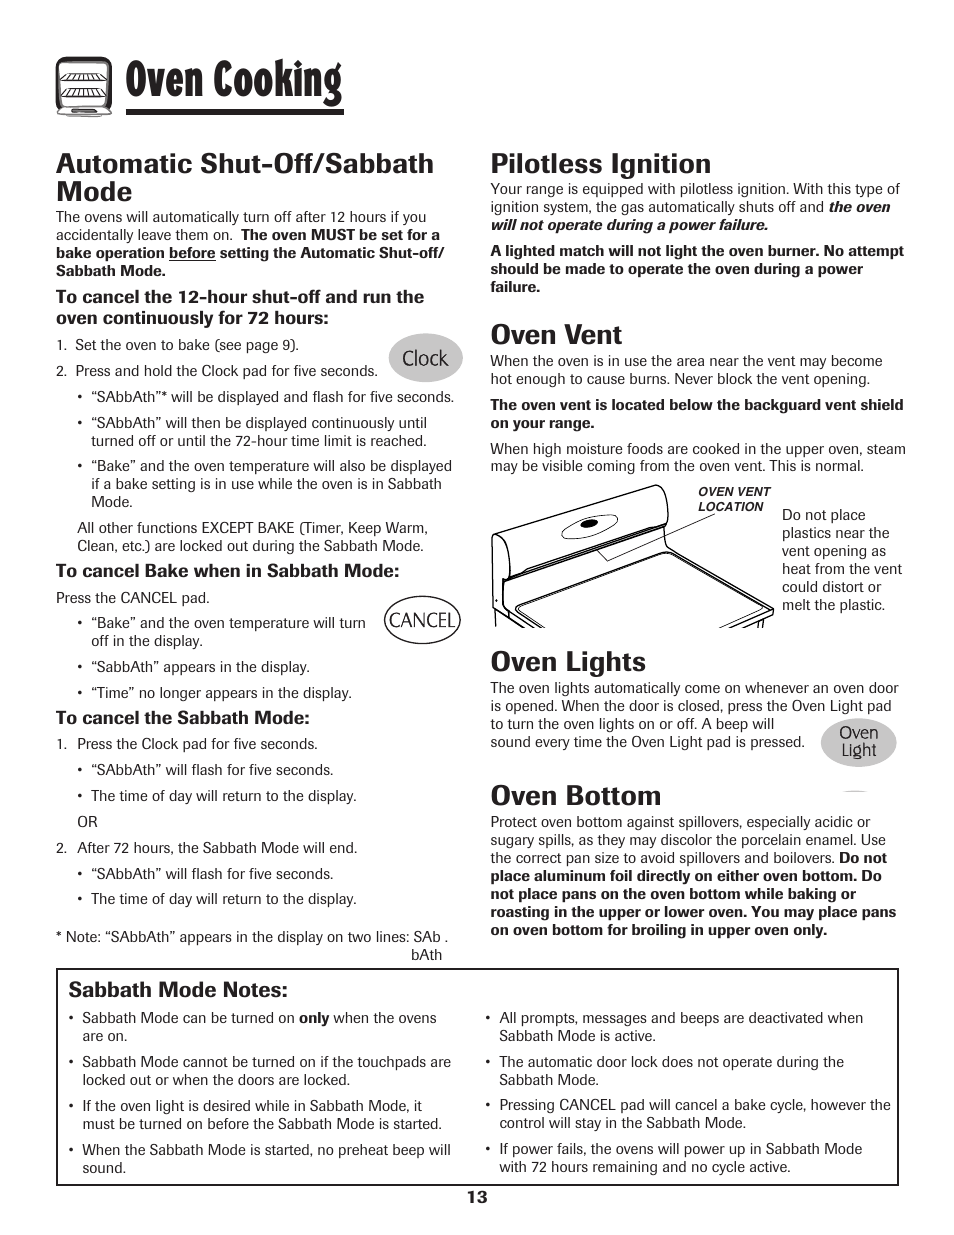 Oven cooking, Automatic shut-off/sabbath mode, Oven vent | Oven lights, Oven bottom, Pilotless ignition | Maytag MGR6751BDW User Manual | Page 14 / 76